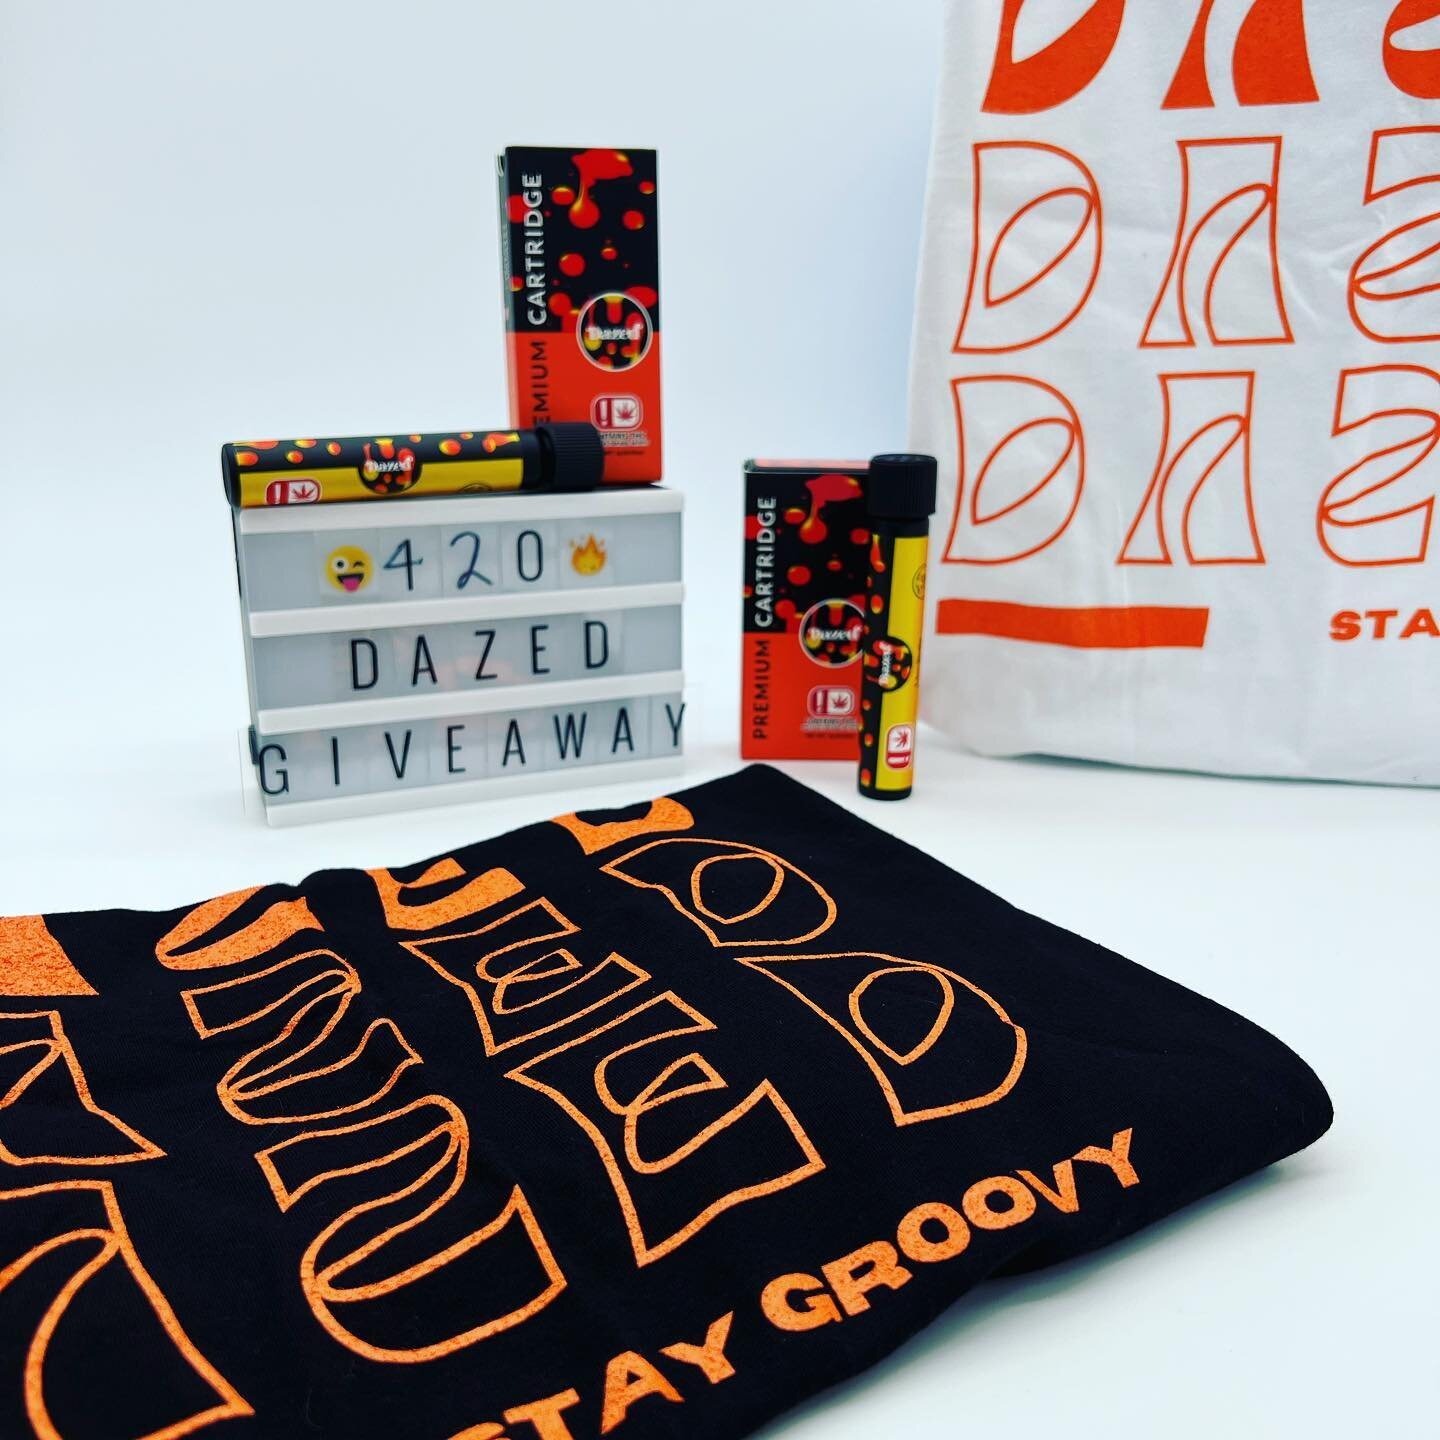 🧡Dazed 💚420💚 GIVEAWAY🧡 

On ❕420❕we are doing a BIG GIVEAWAY
we will be giving away a 🧡Dazed tee, a 
🧡Dazed goody bag and&hellip; 
$420 💸CASH PRIZE💸 

✅rules for entry 

🟢must be following @_dazedinokc 

🟢tag a friend in the comments (the m